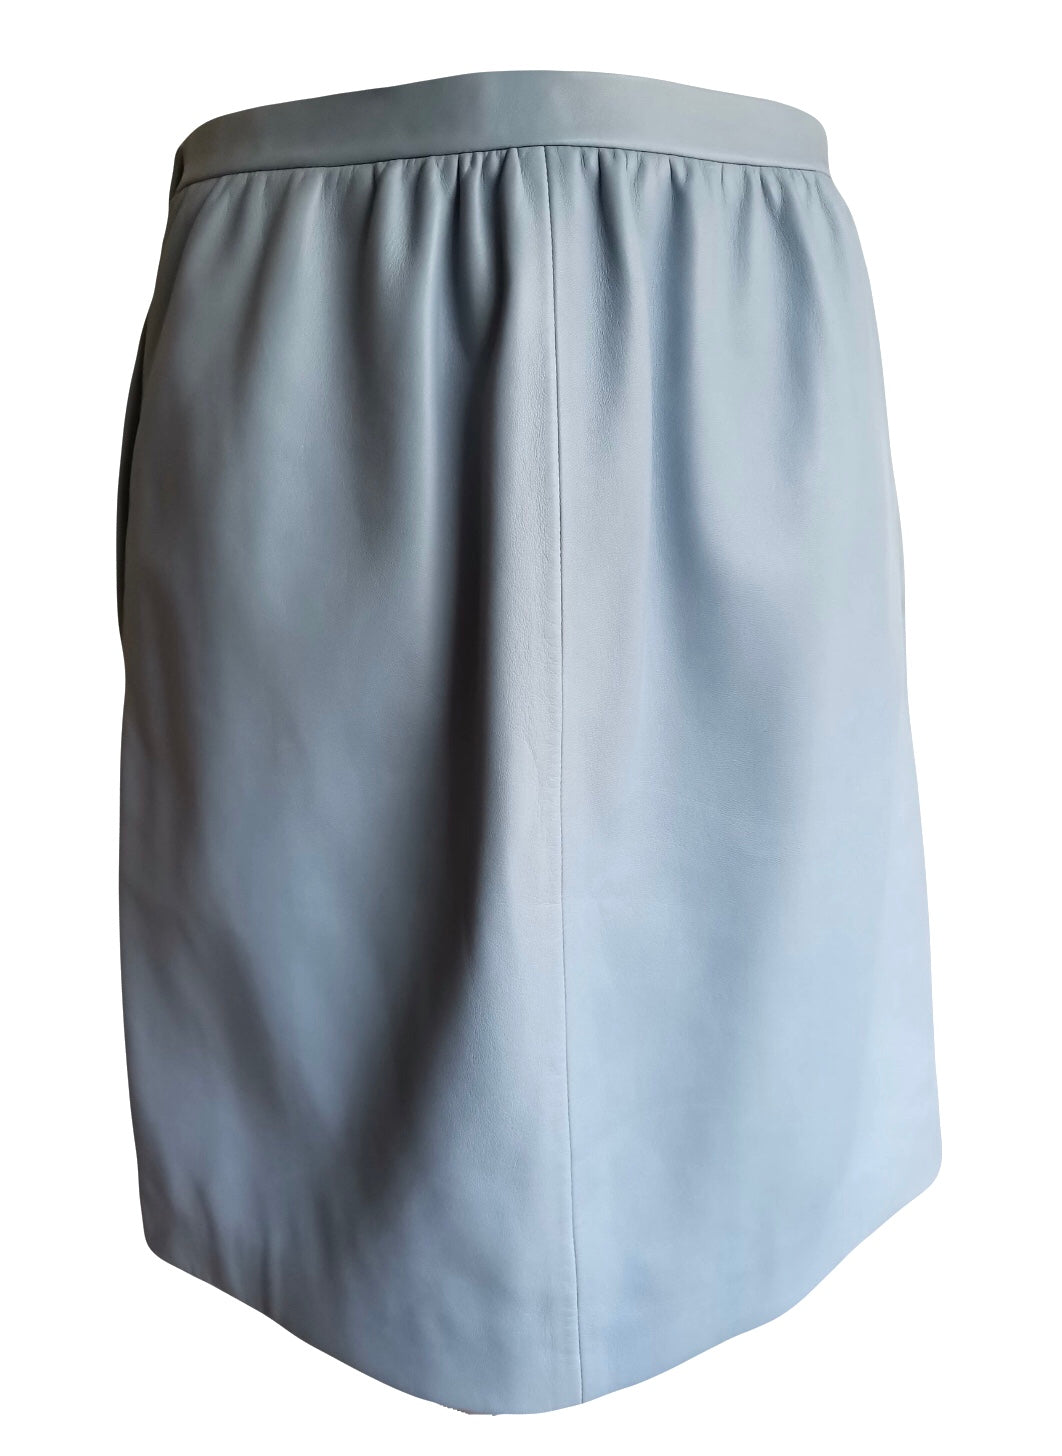 GUCCI baby blue leather skirt size 8uk